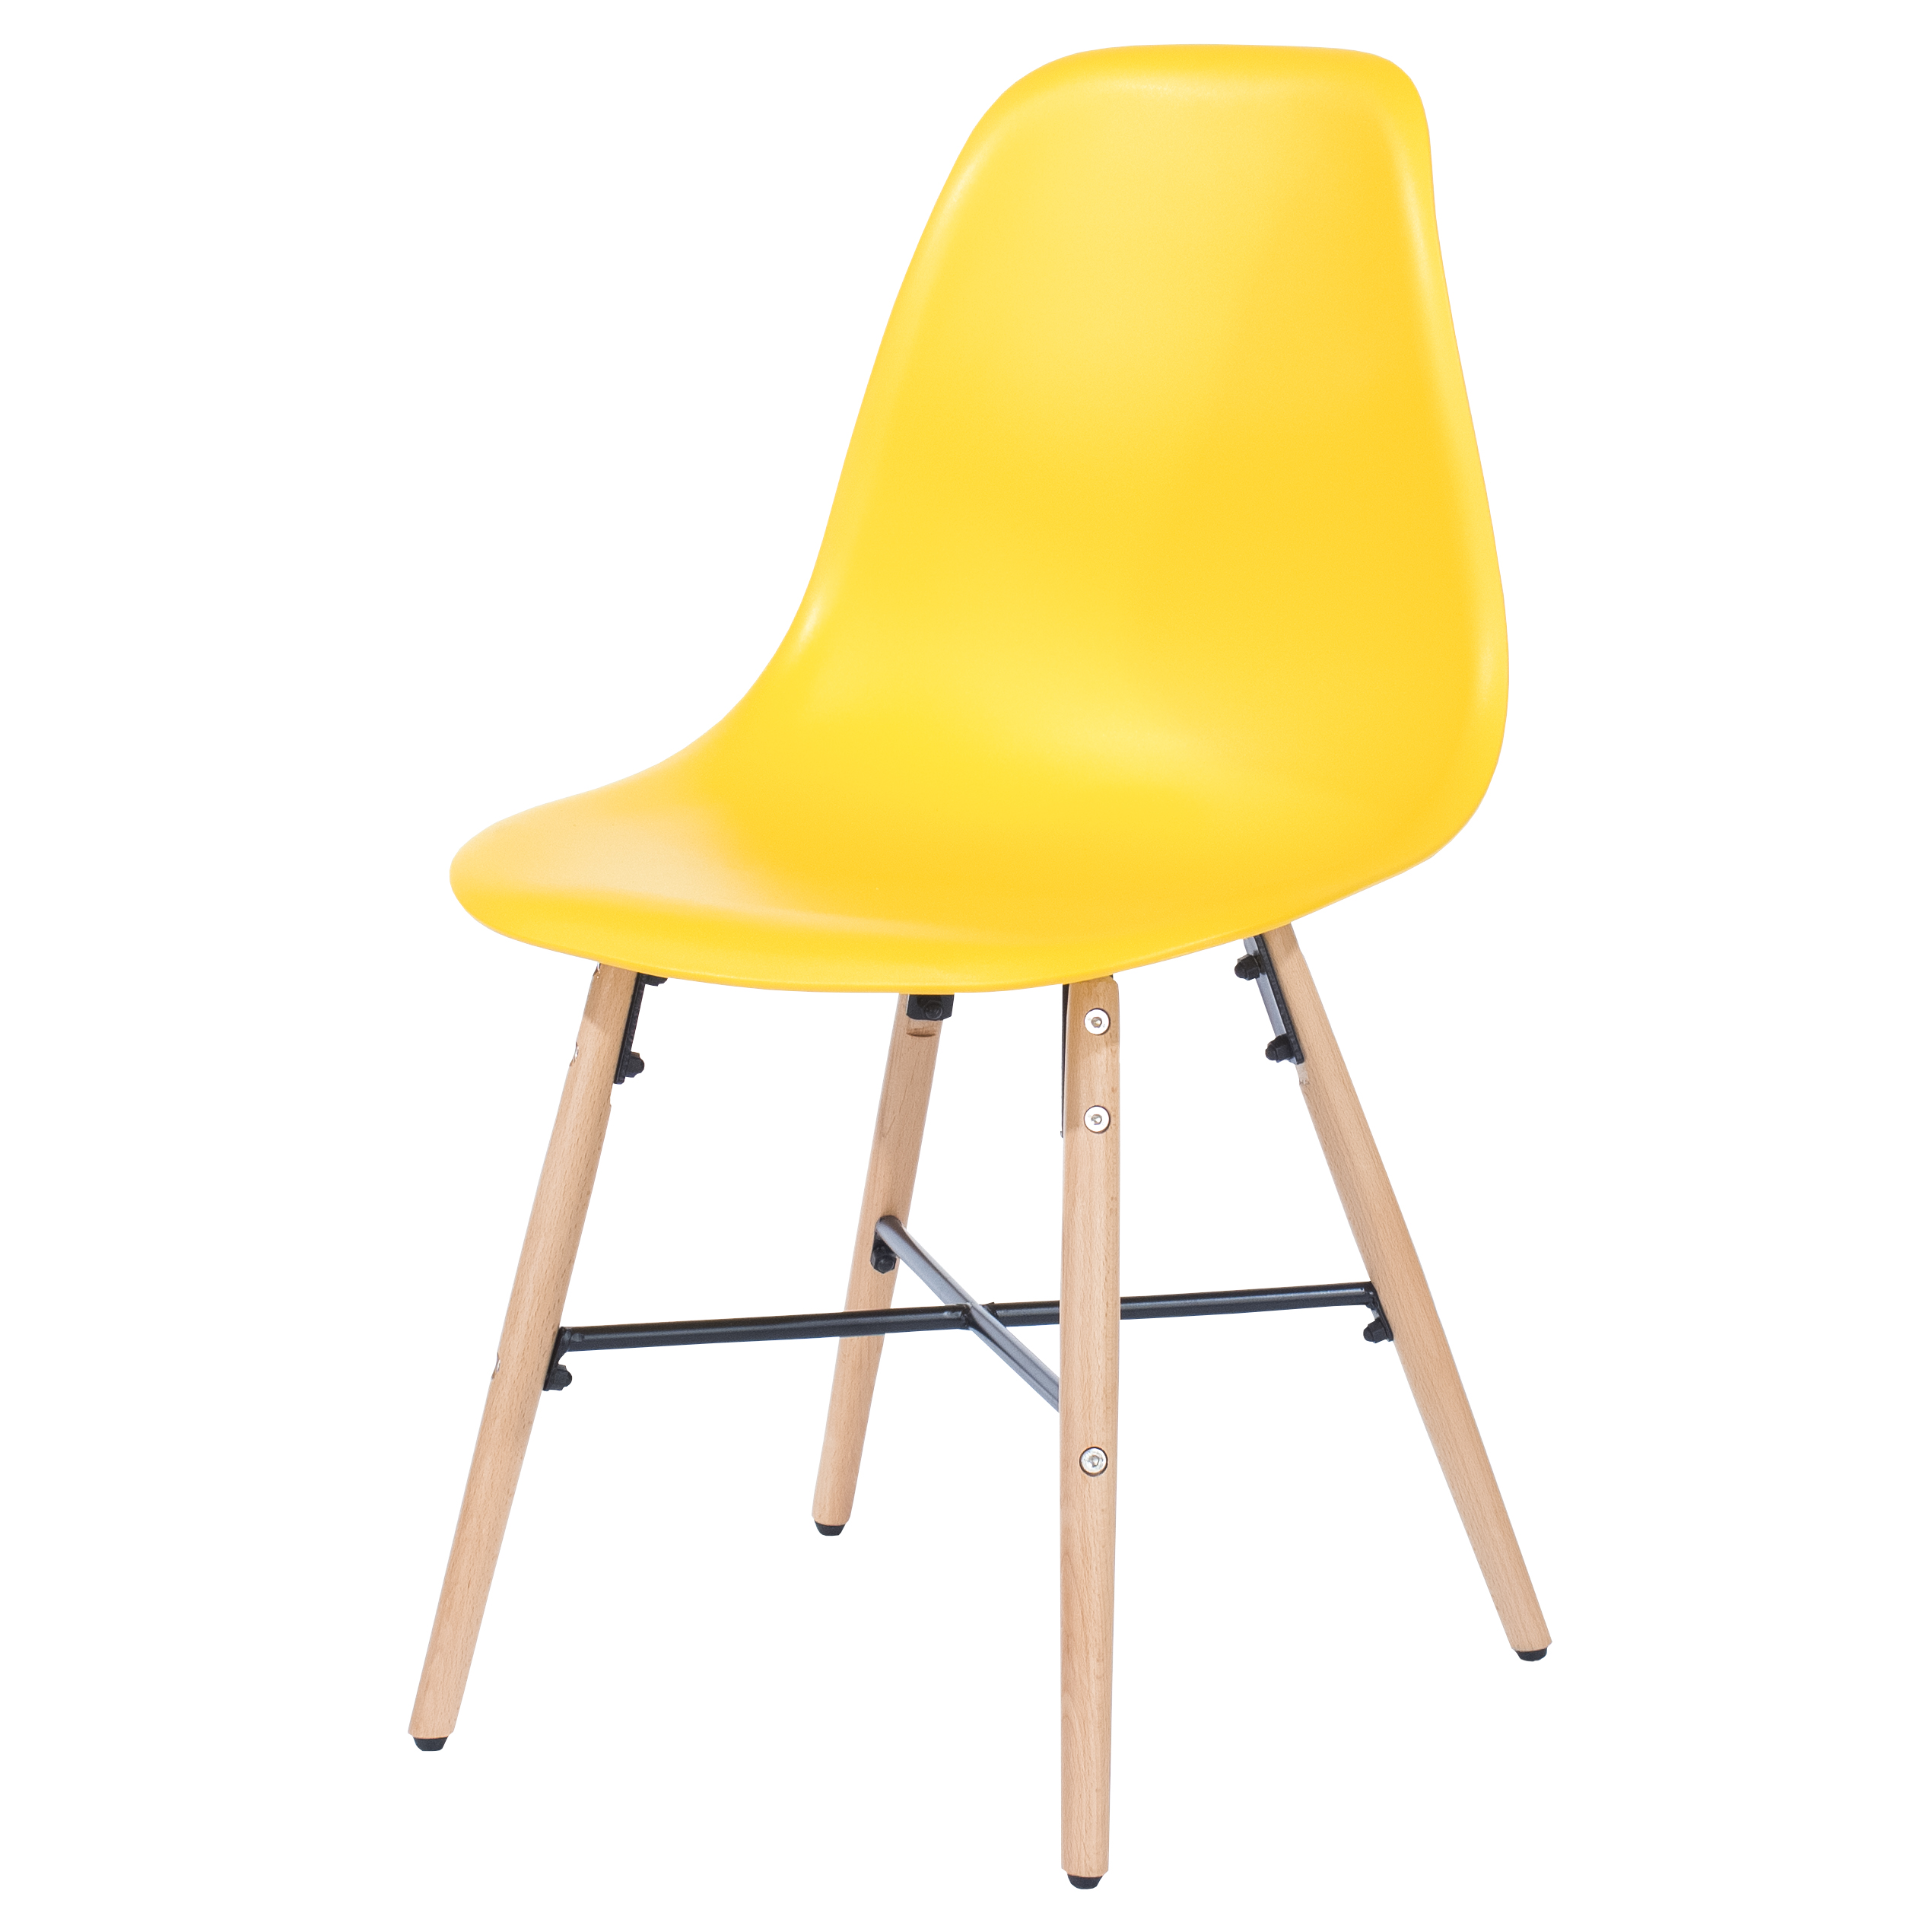 Penny yellow plastic chairs with wood legs & metal cross rails (pair)